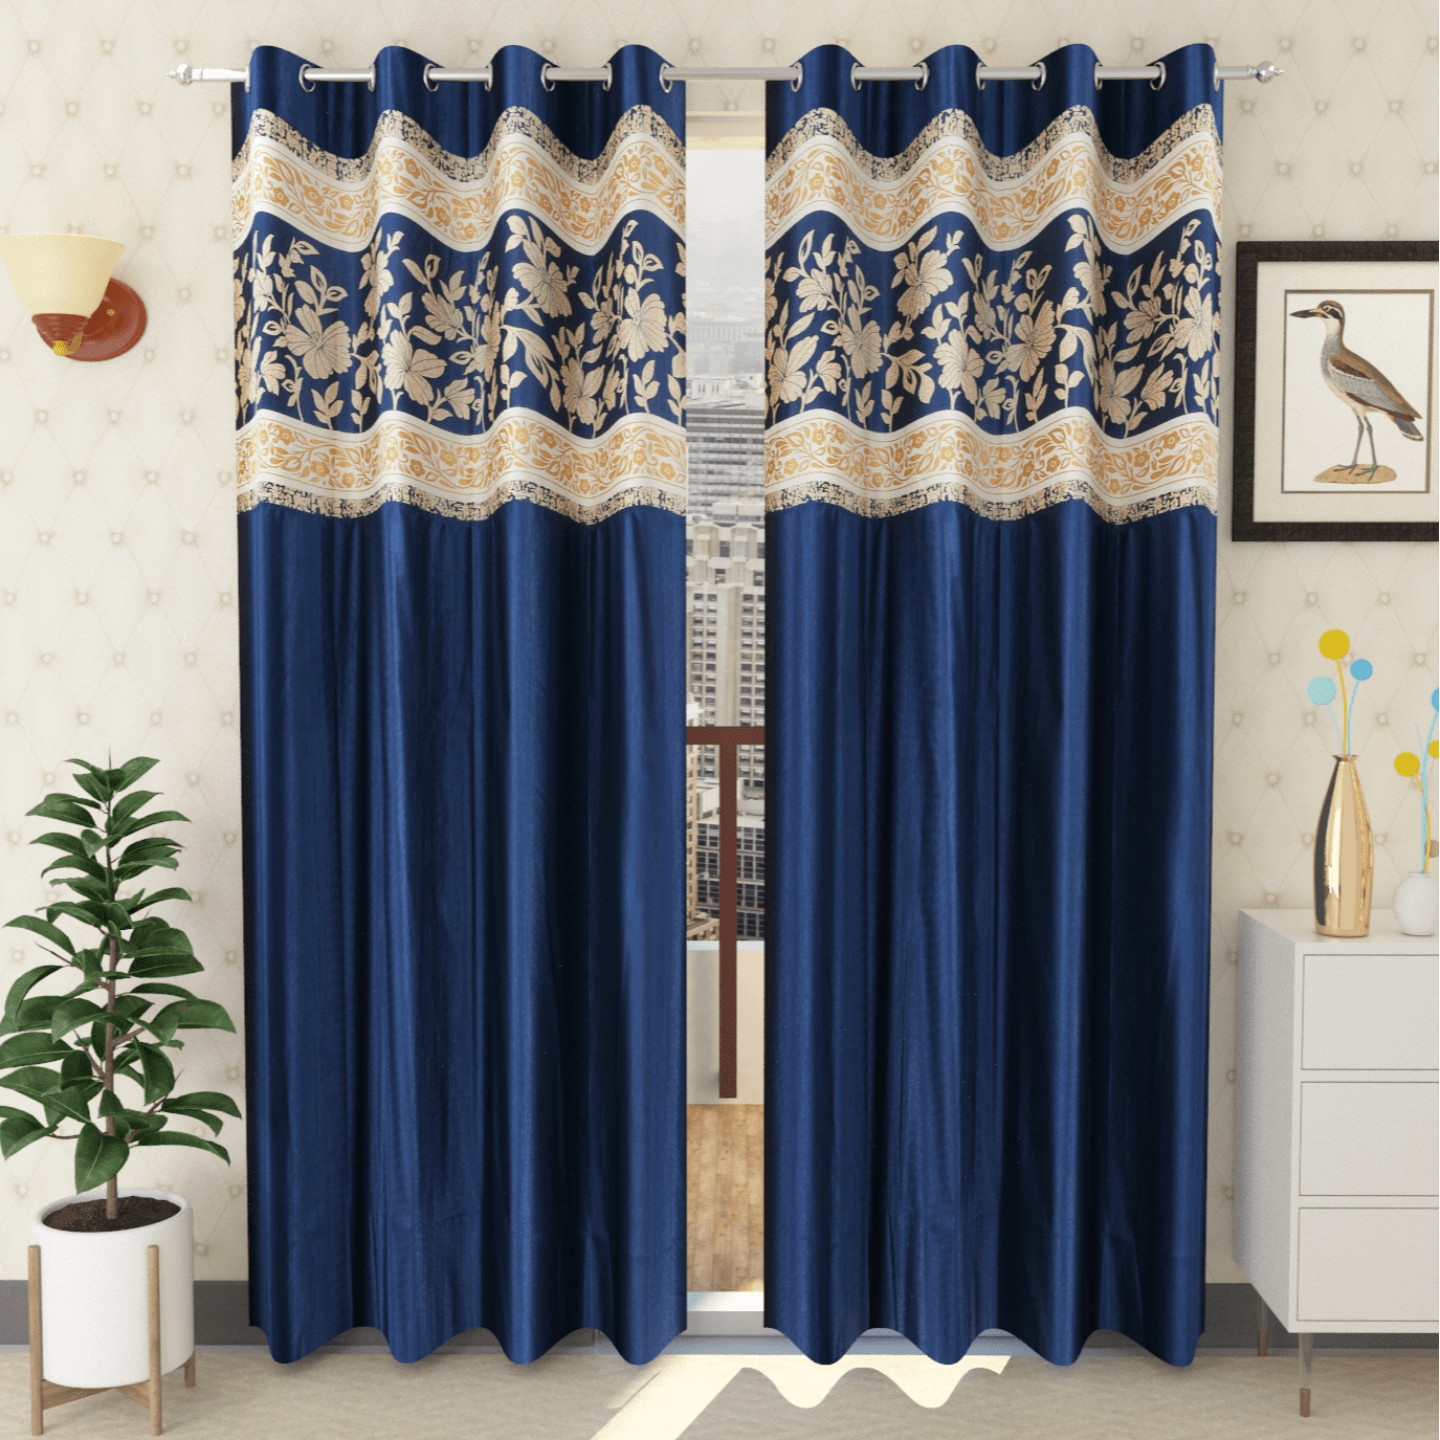 Handtex Home Patchwork curtain for door 9 feet set of 2pc Blue color